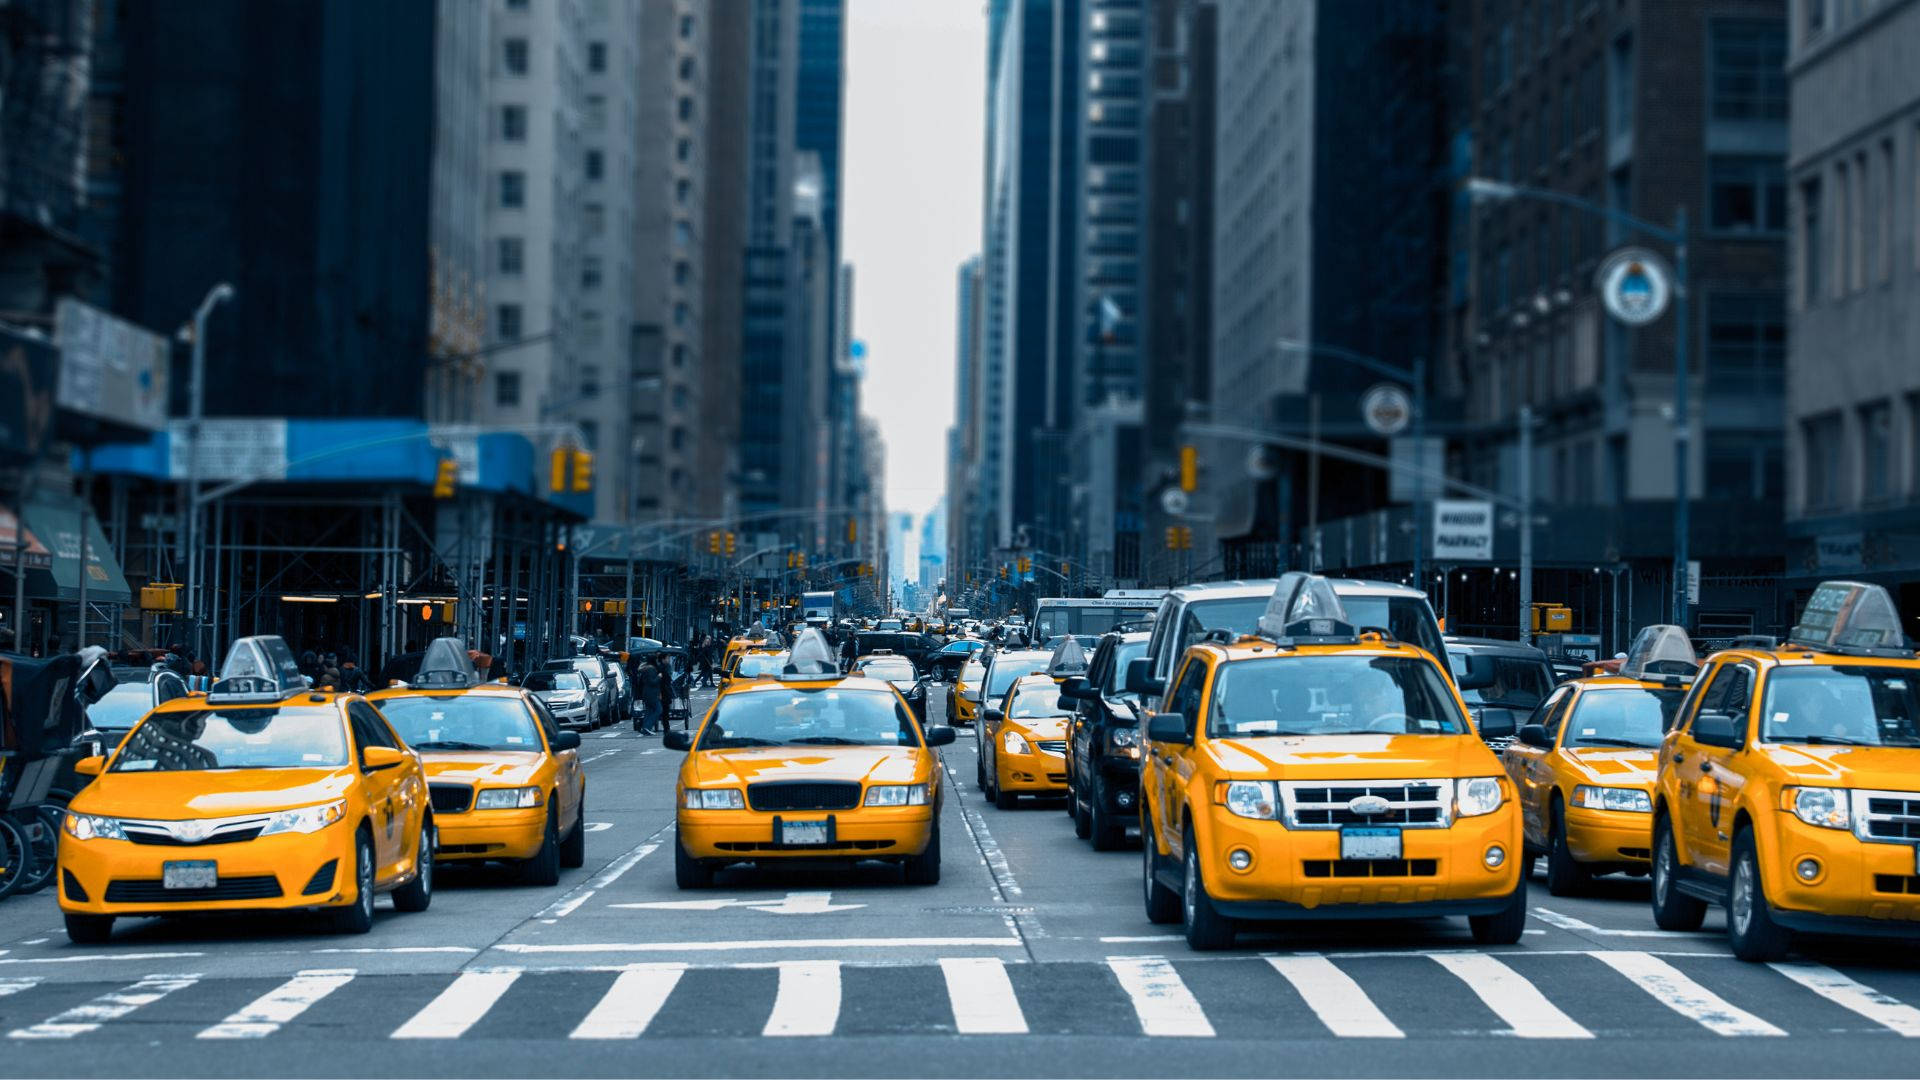 Taxi Cab Images - Free Download on Freepik